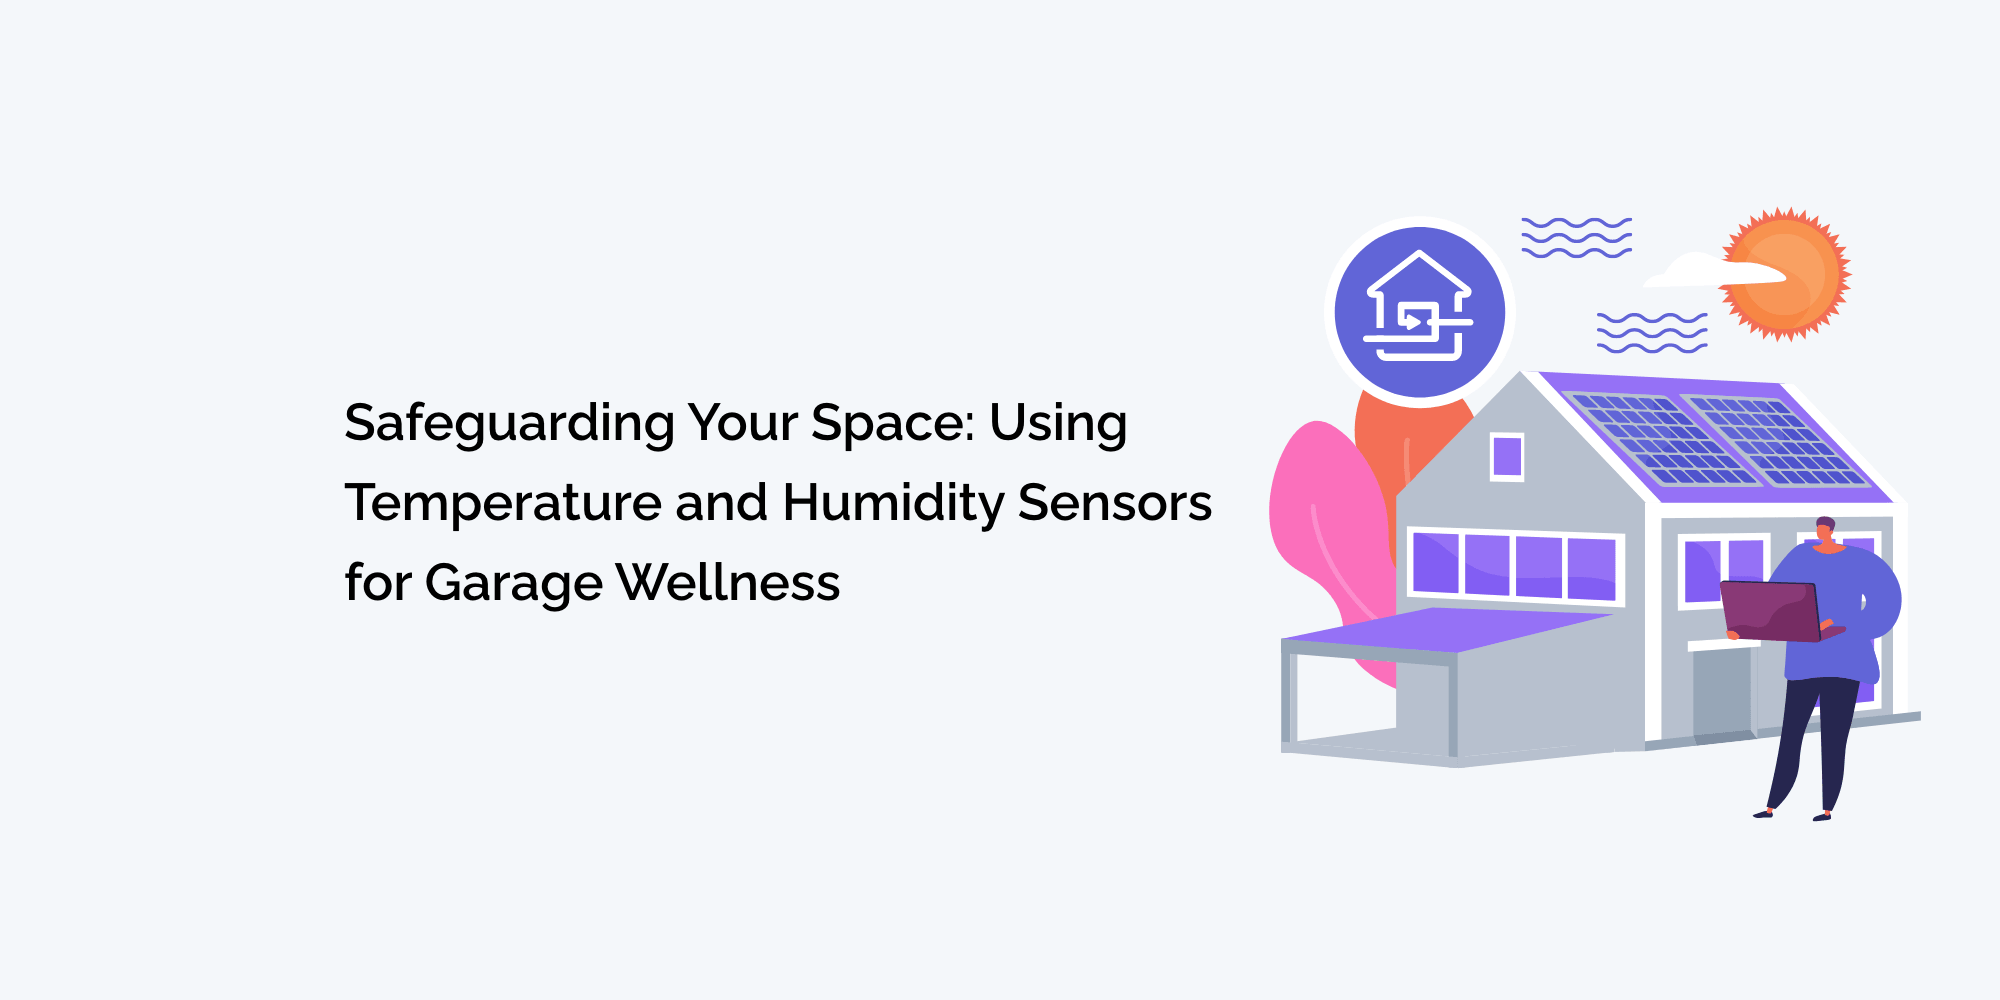 Safeguarding Your Space: Using Temperature and Humidity Sensors for Garage Wellness